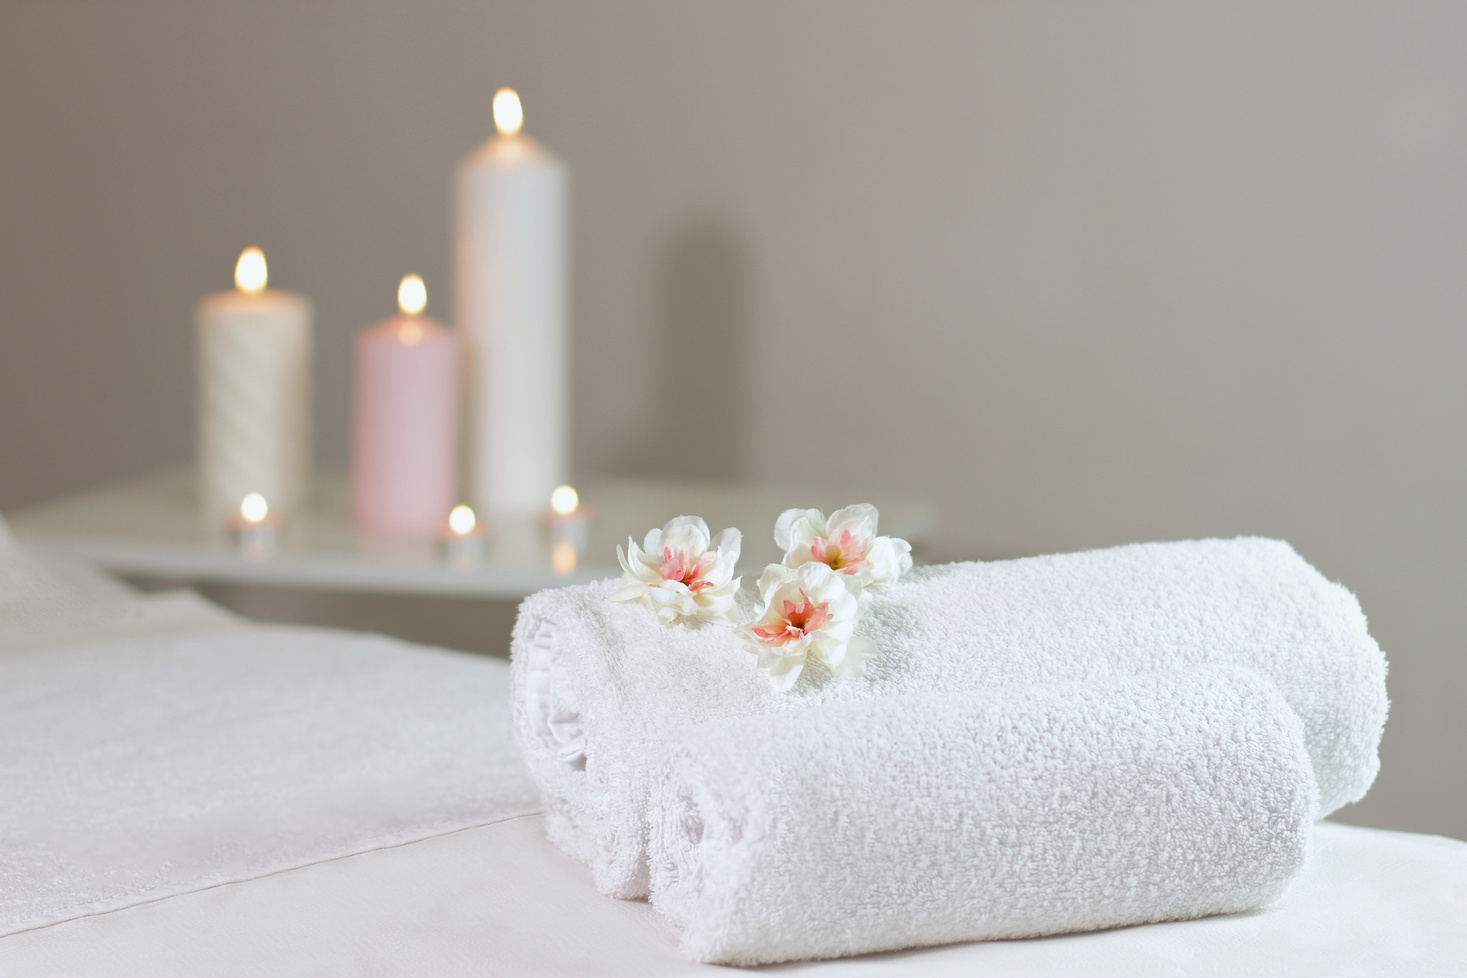 Massage Table with Towels and Candles